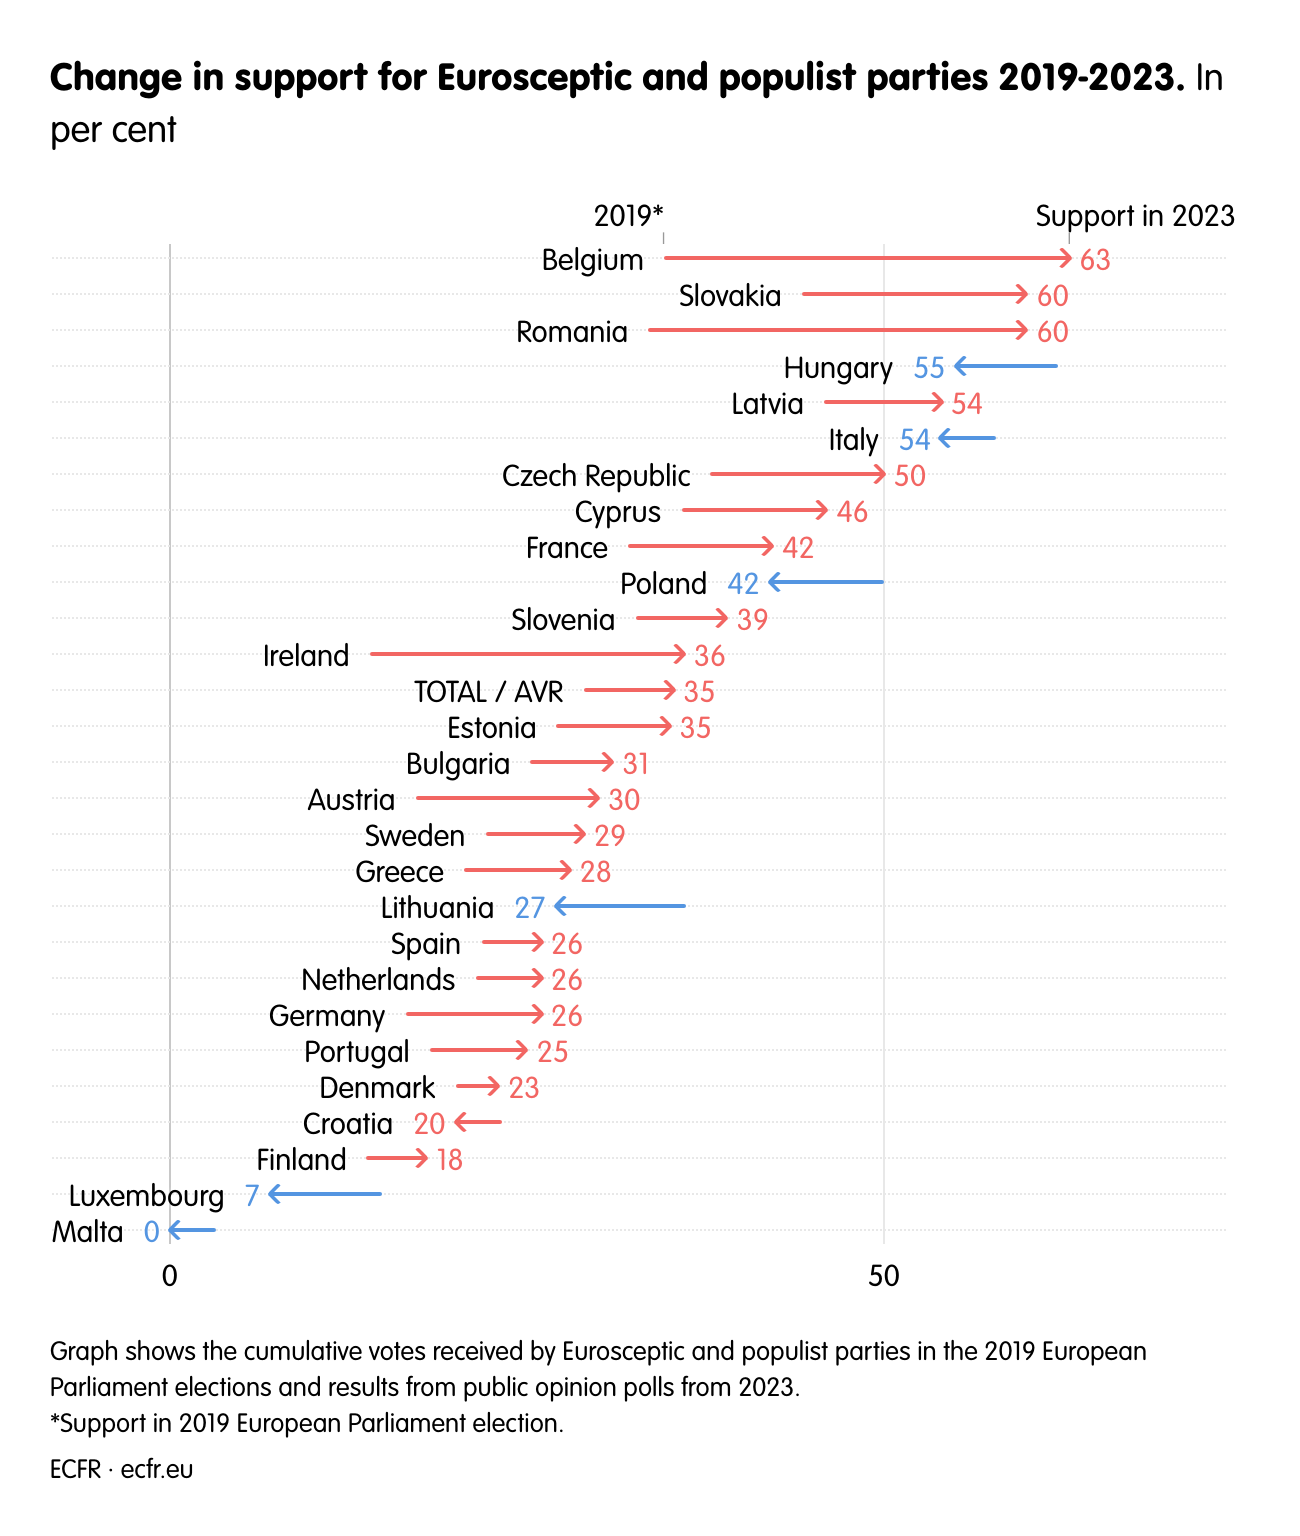 Change in support for Eurosceptic and populist parties 2019-2023.